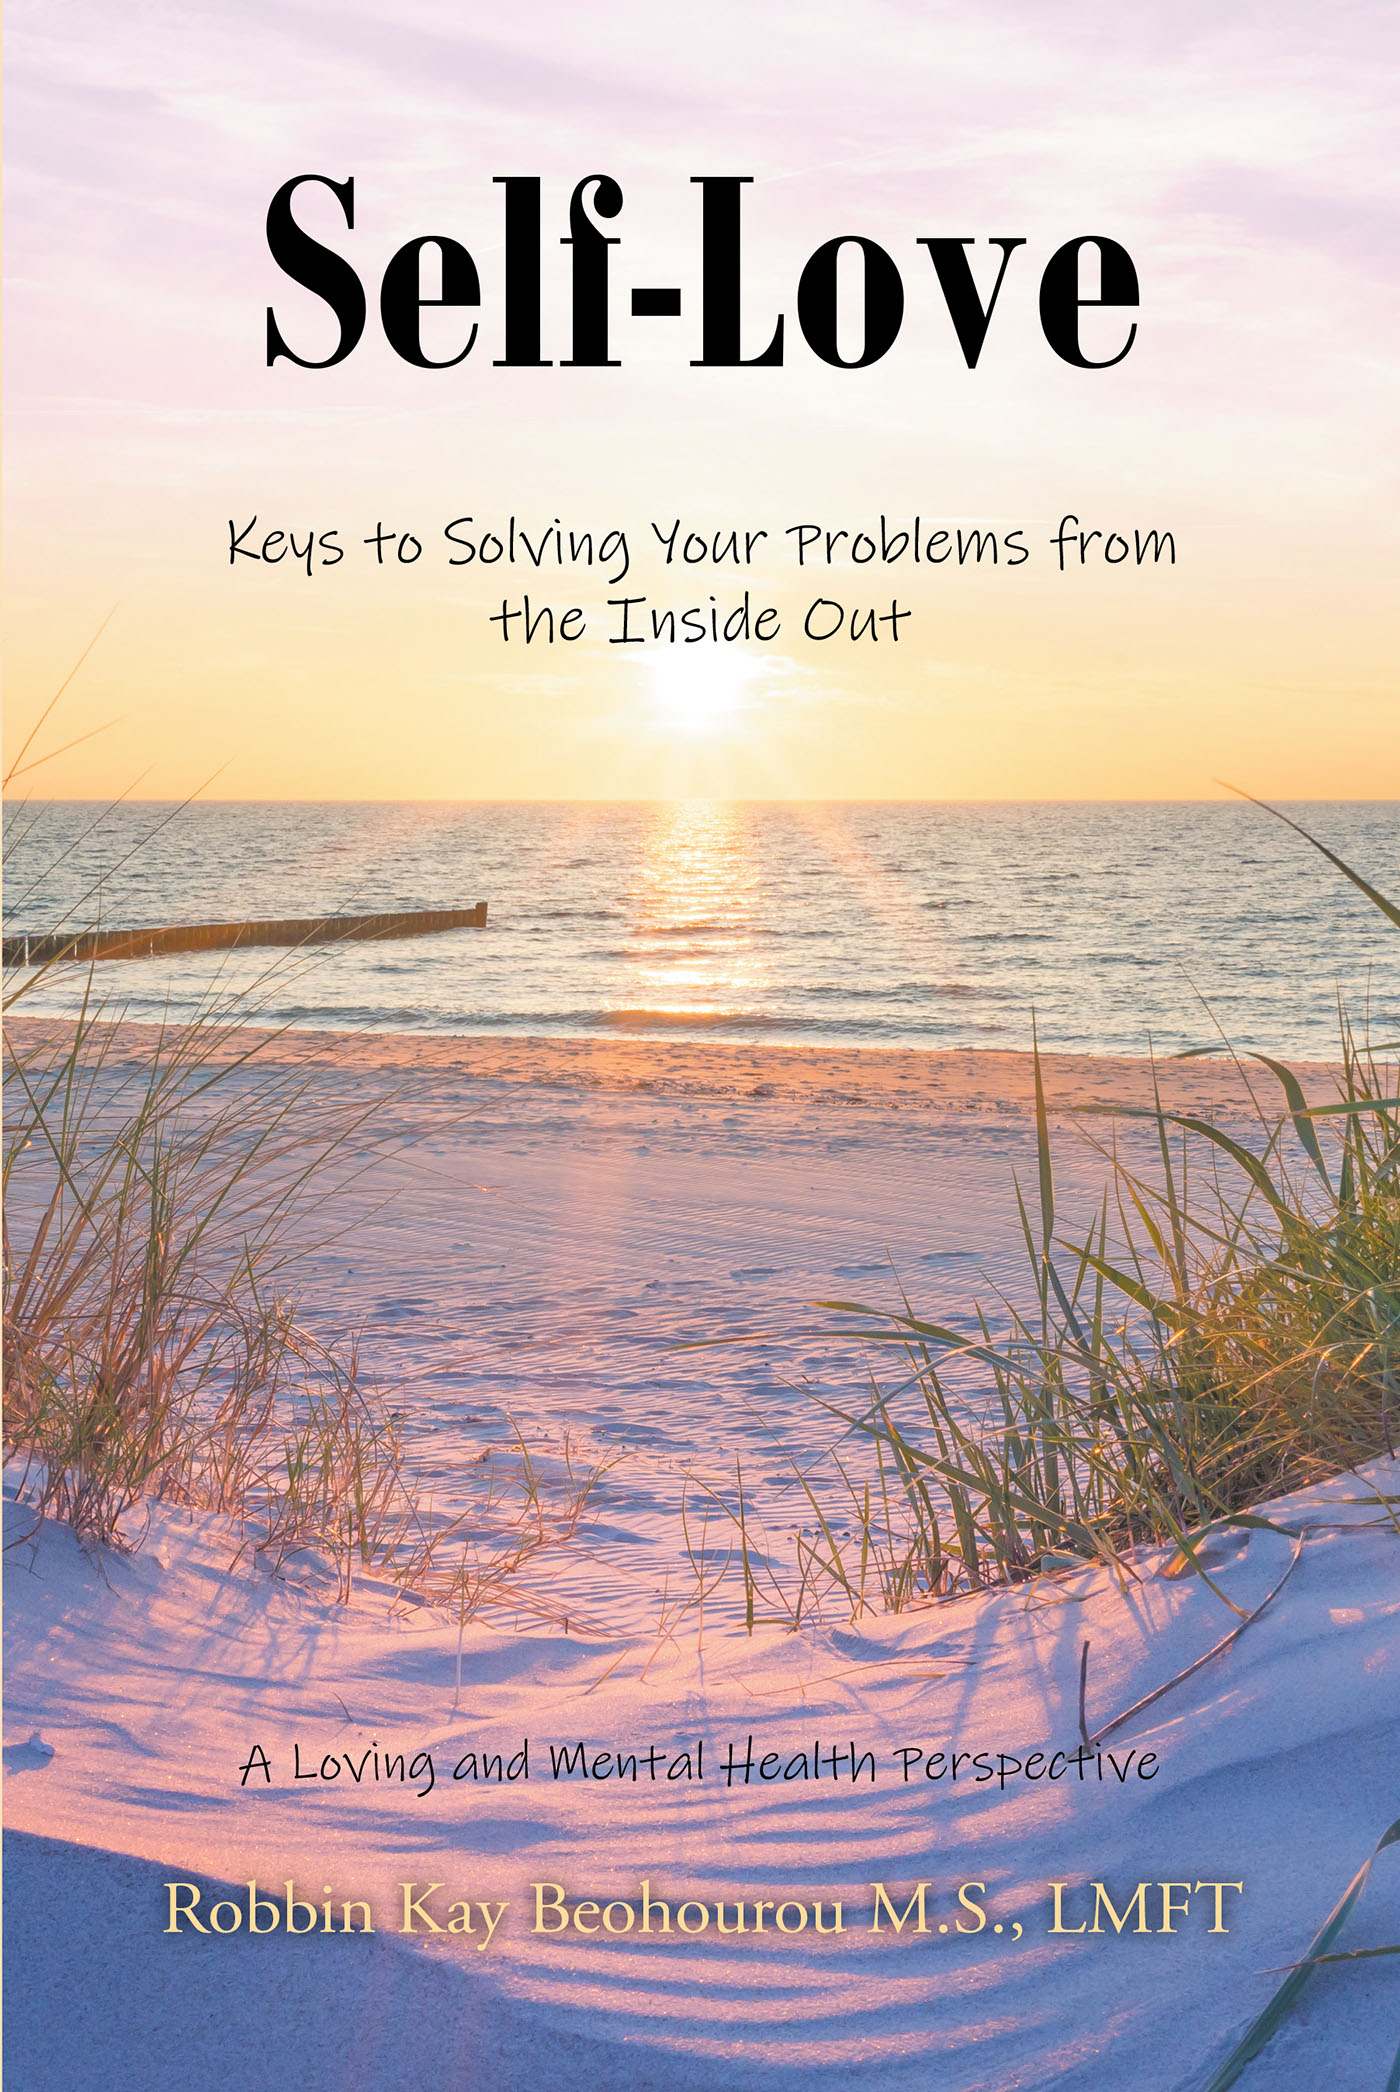 Robbin Kay Beohourou M.S. LMFT’s Newly Released “Self-Love: Keys to Solving Your Problems from the Inside Out” is an Interactive Therapeutic Exercise